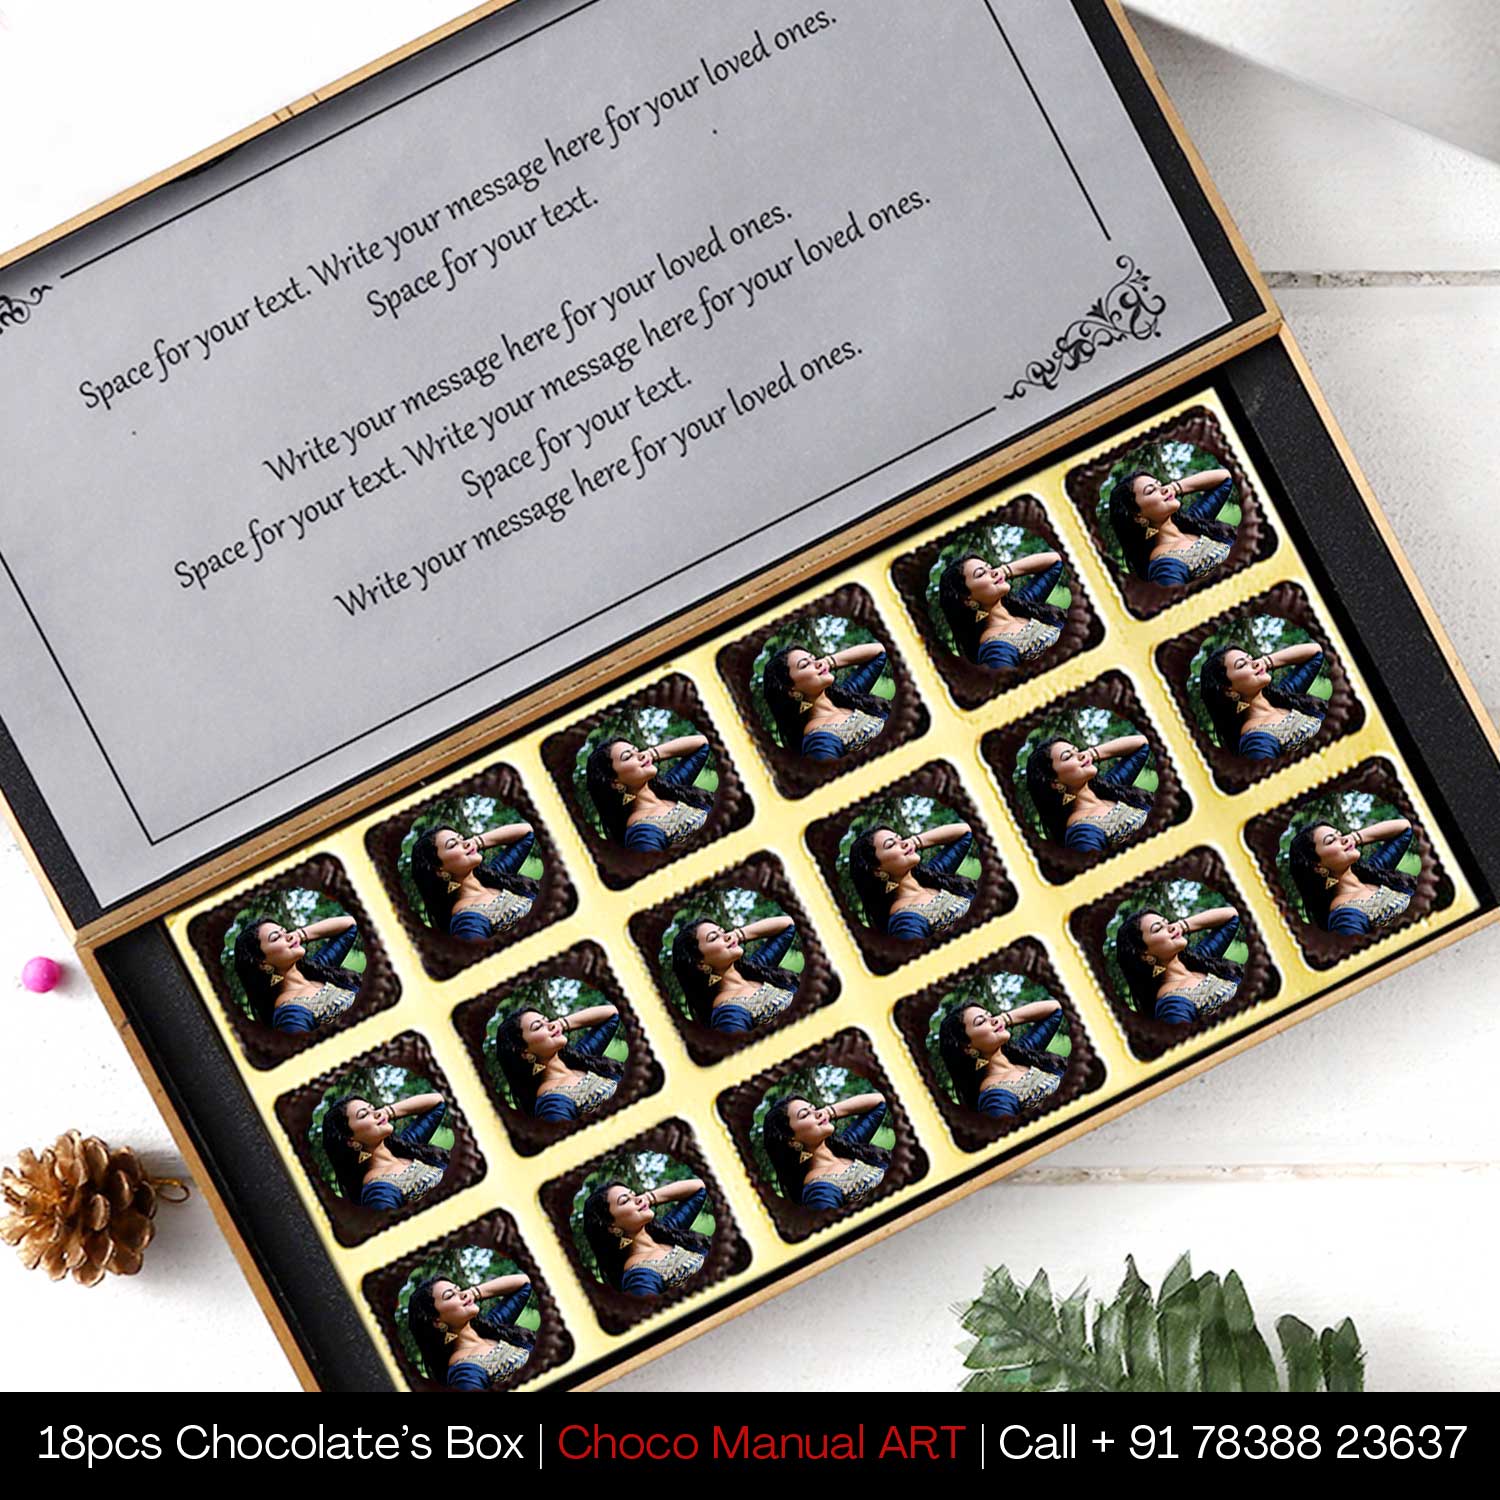  personalised chocolates with names personalised chocolates for birthdays personalised chocolates with photo customised chocolate box customized chocolate near me personalised chocolate dairy milk customized chocolate box near me customized chocolate wrappers